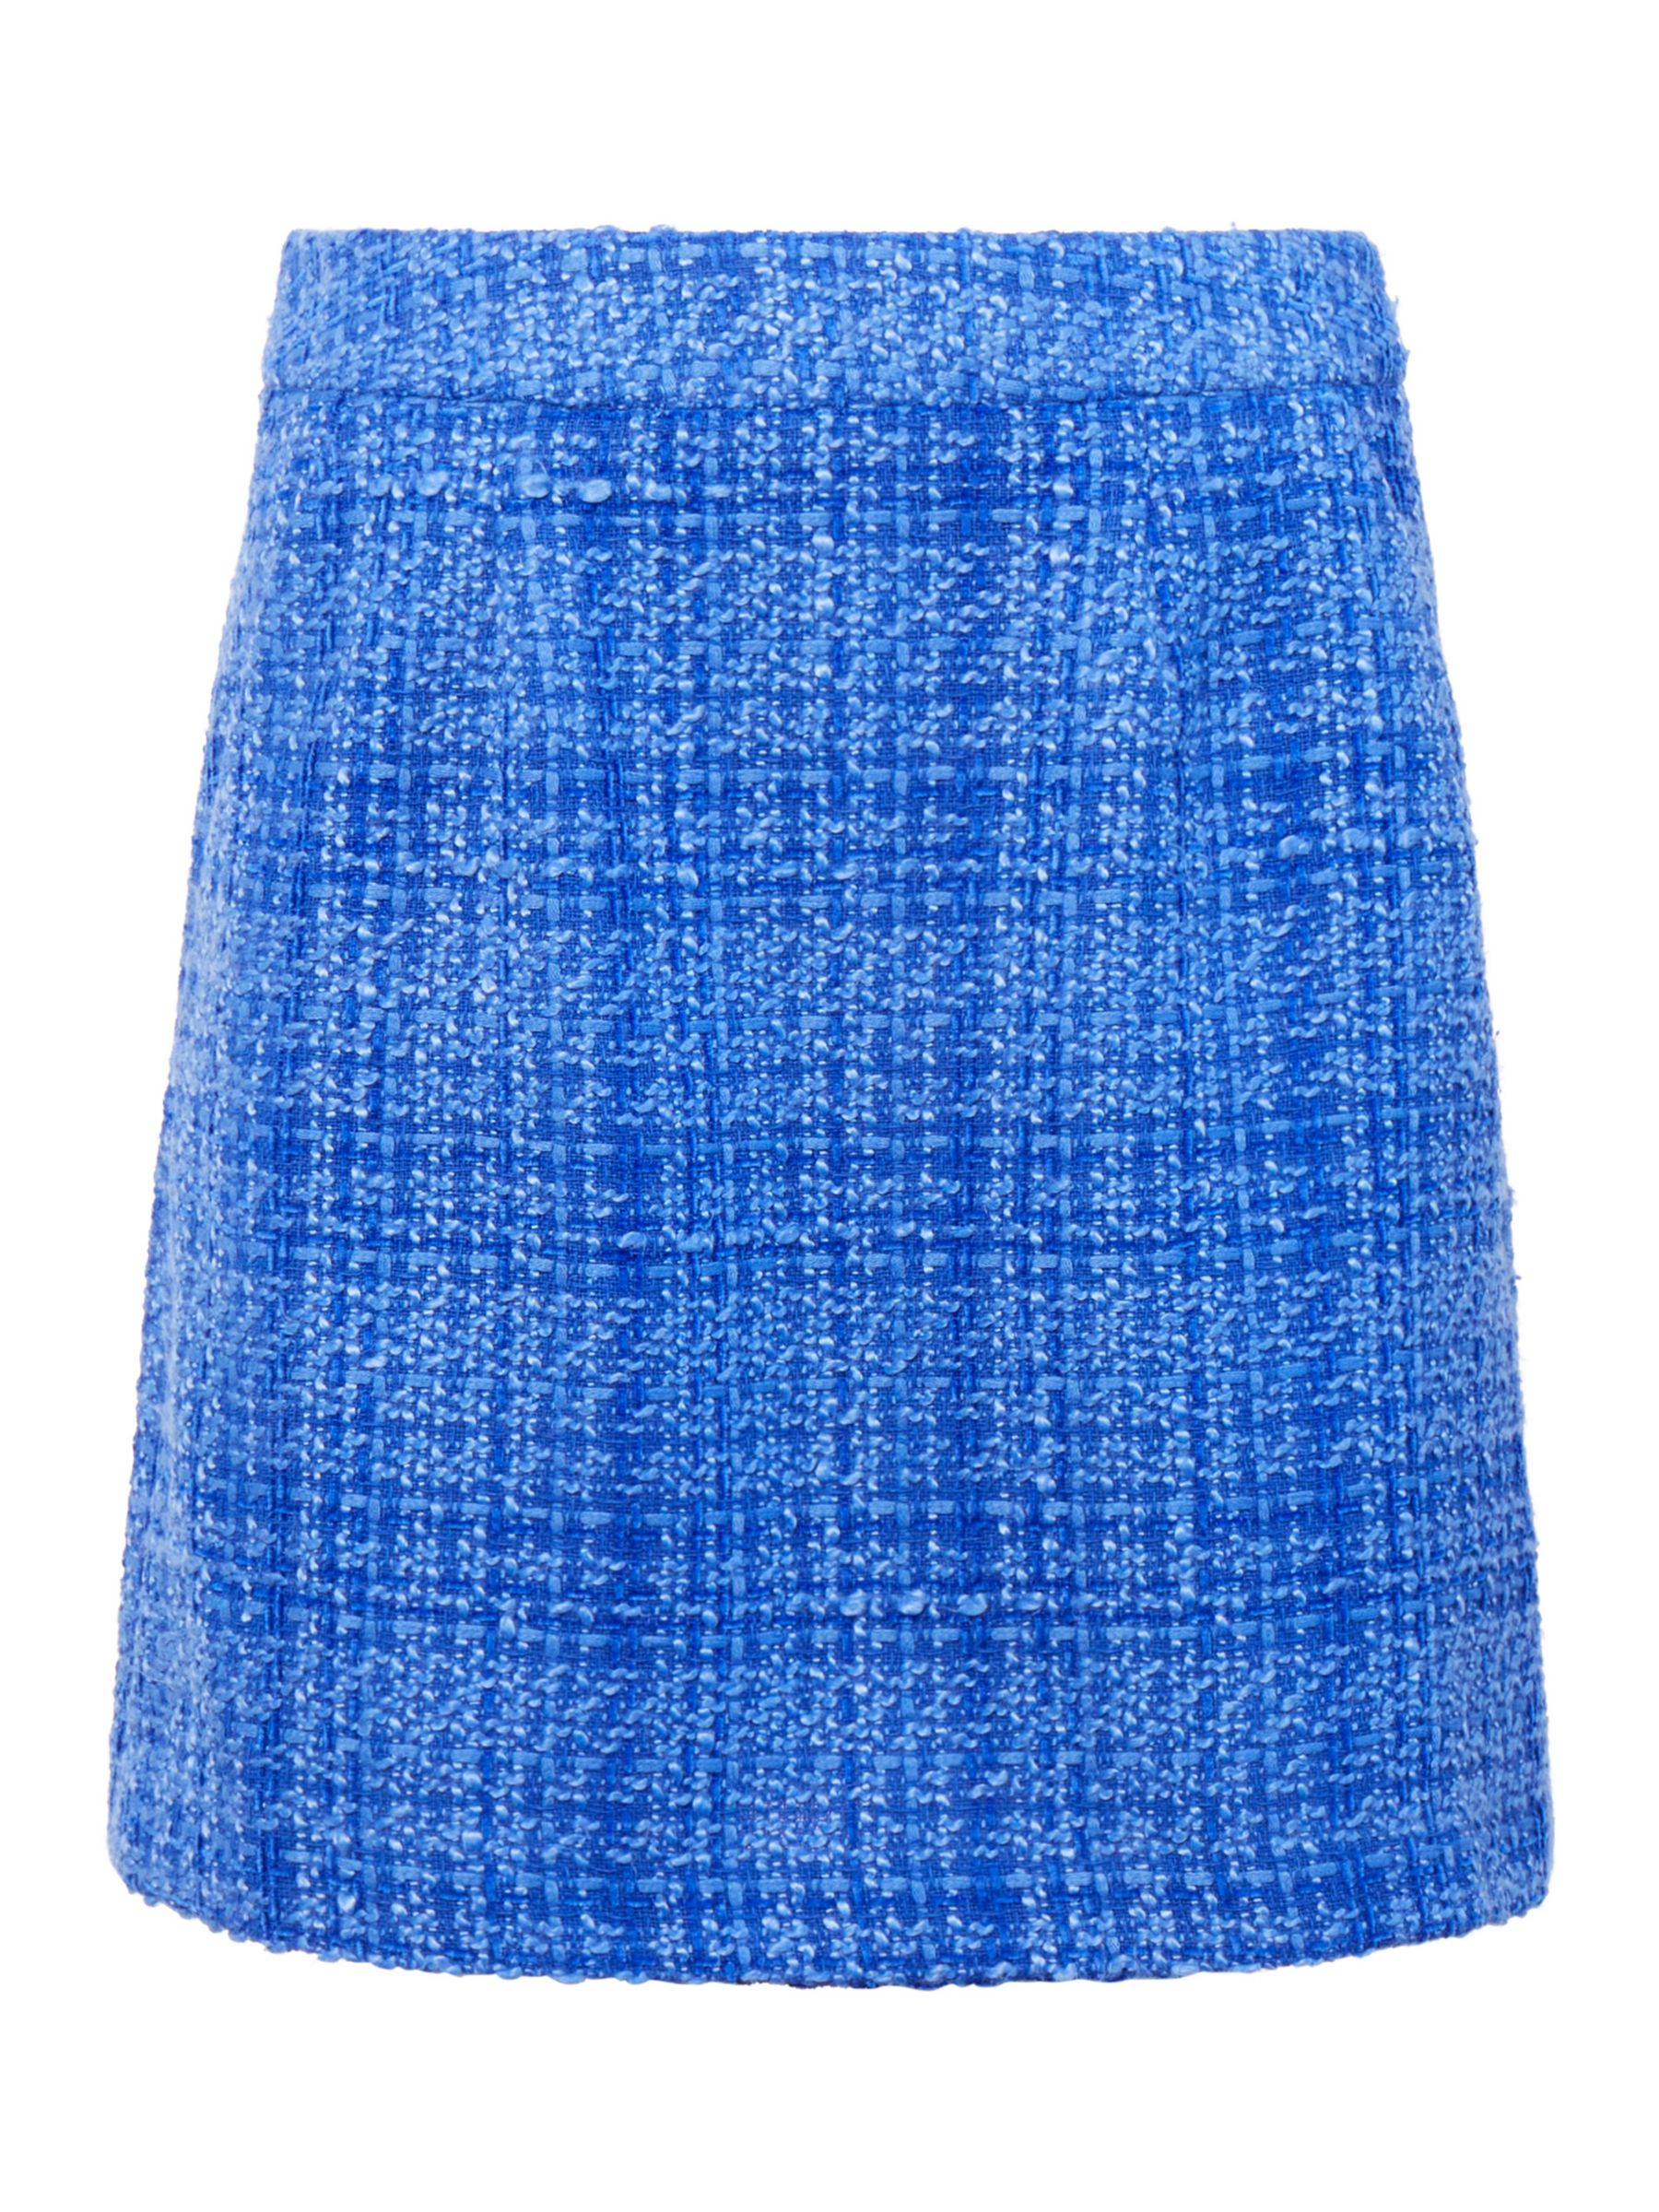 French Connection Azzurra Tweed Mini Skirt, Light Blue Depths, 8